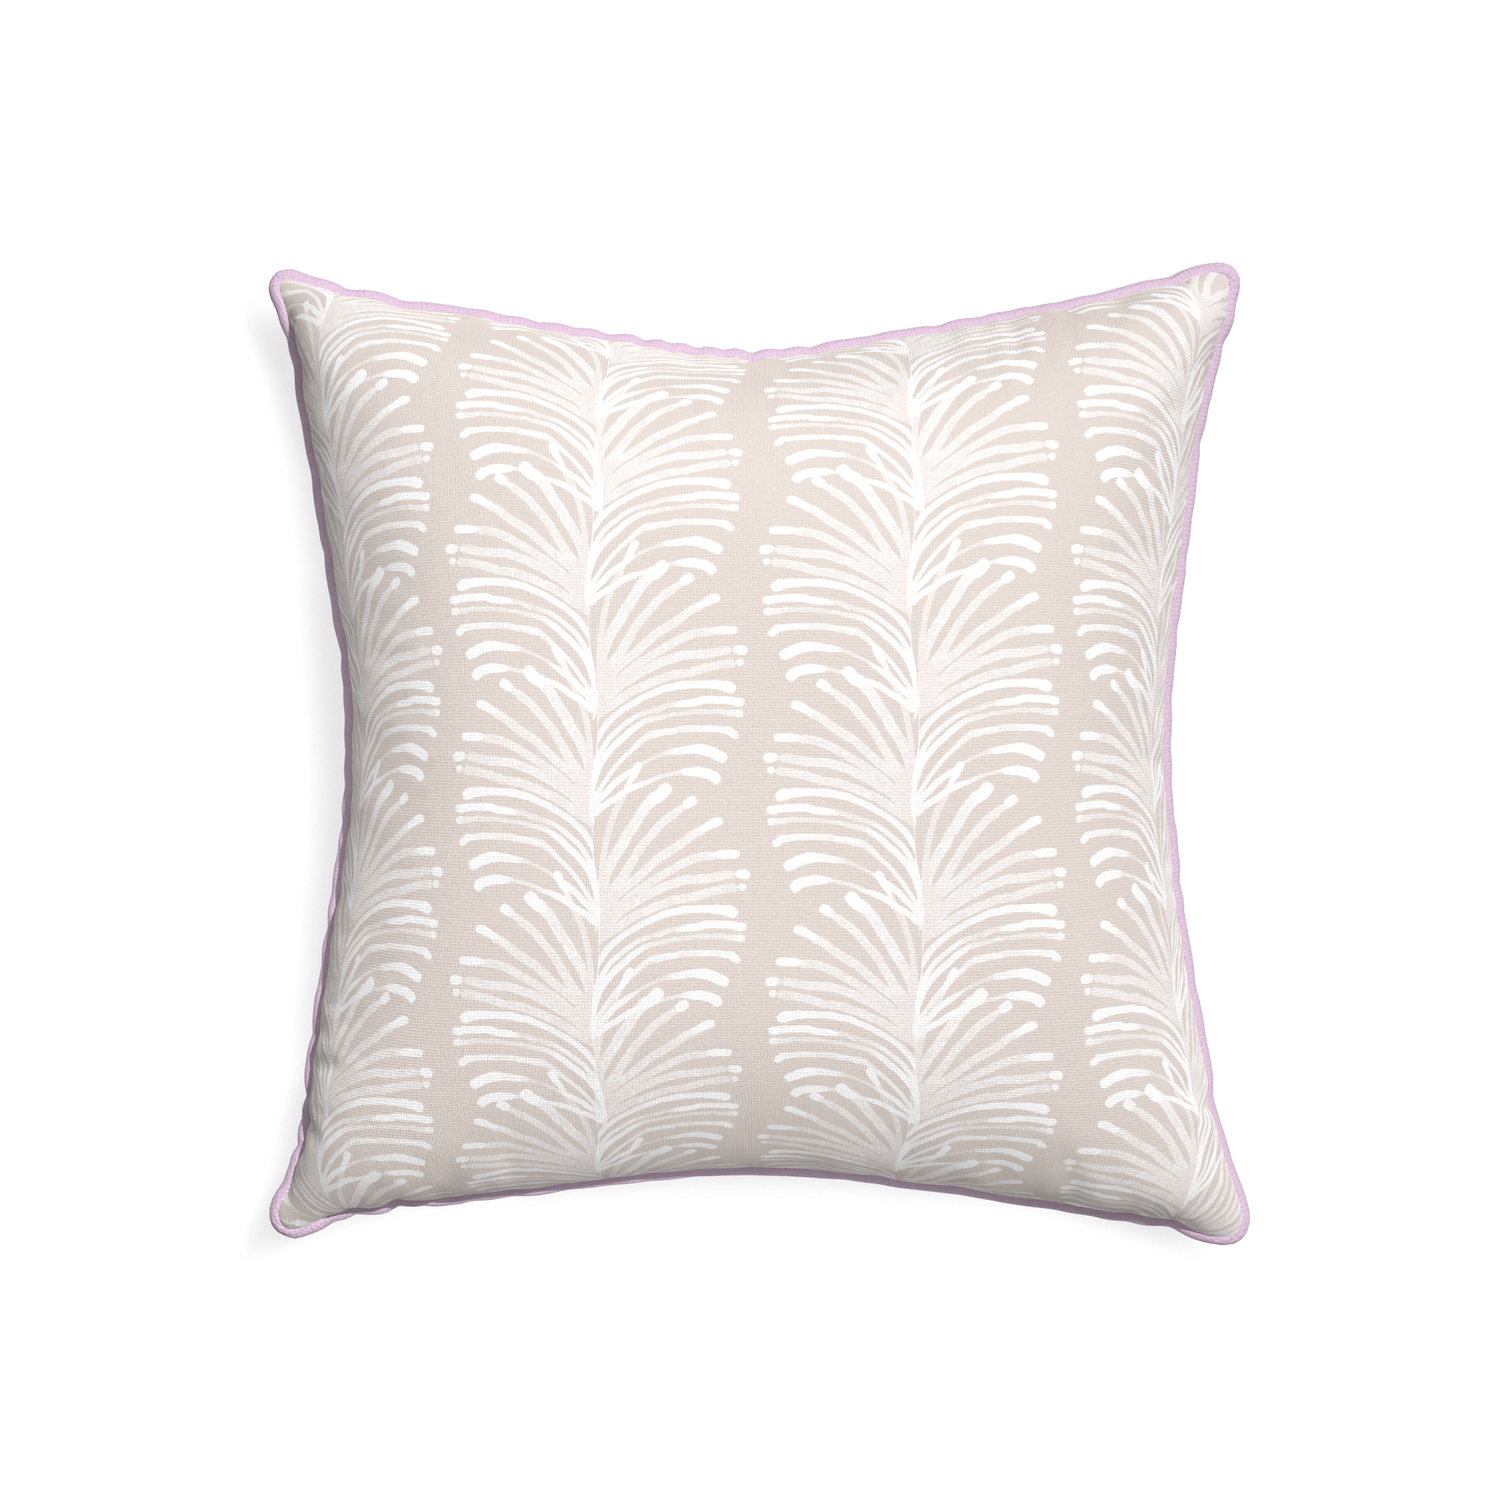 22-square emma sand custom pillow with l piping on white background